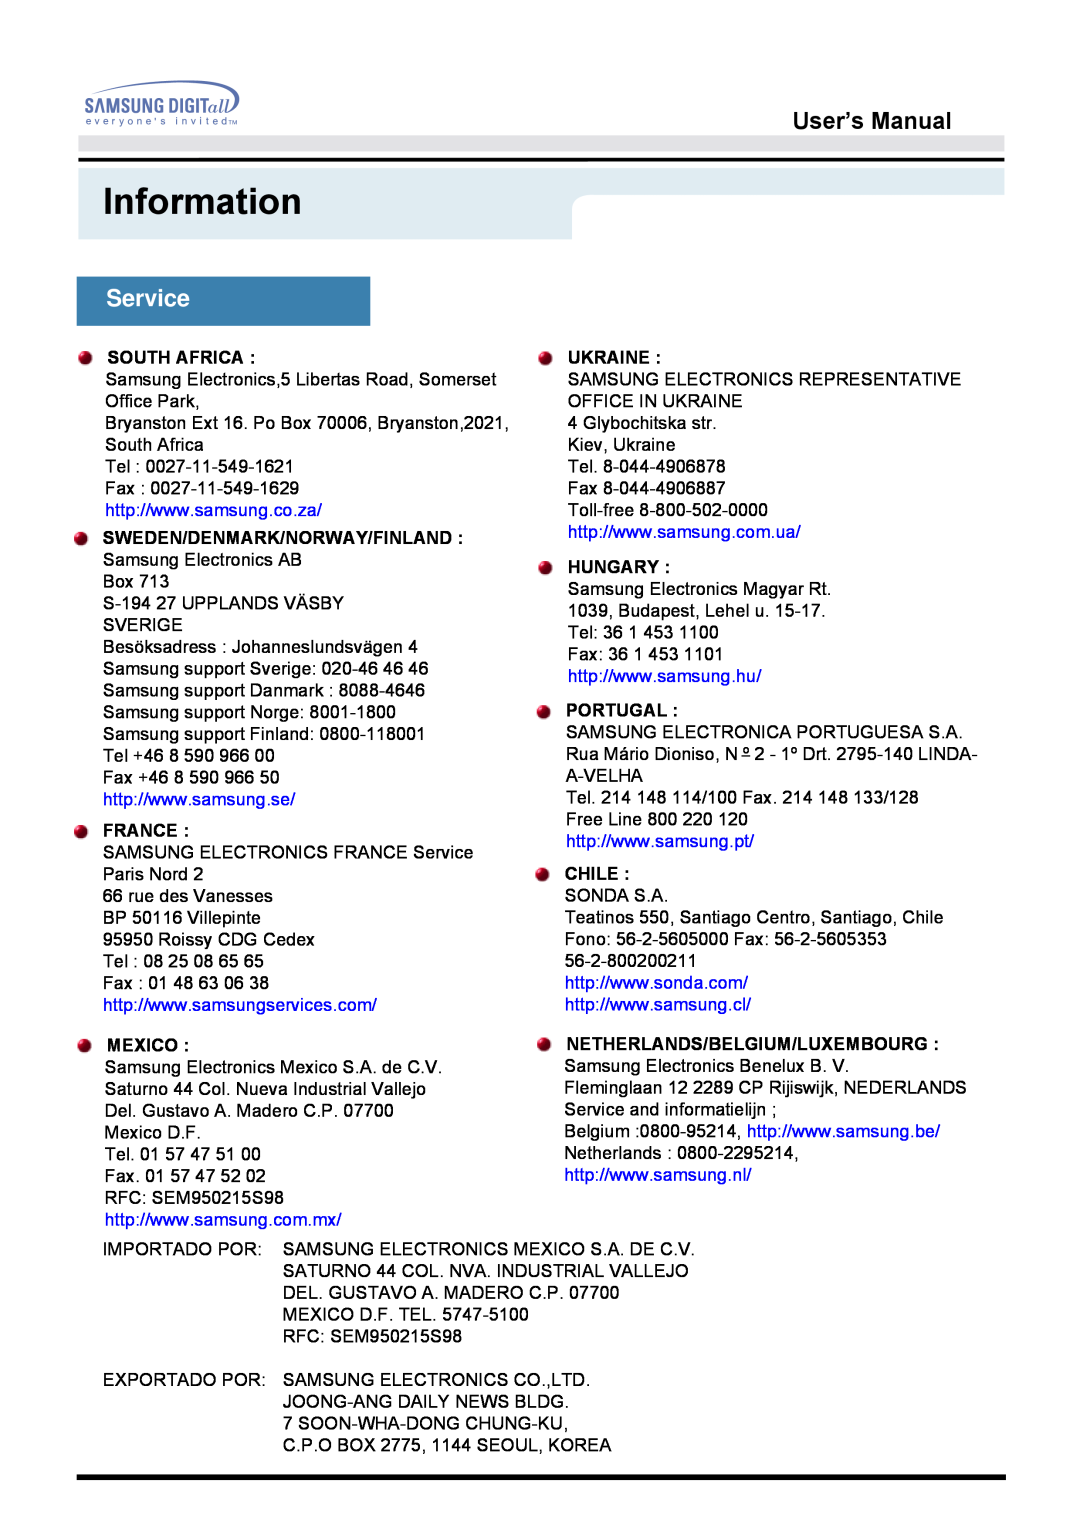 Samsung 172S Service, Information, User’s Manual, South Africa, Sweden/Denmark/Norway/Finland, France, Mexico, Ukraine 